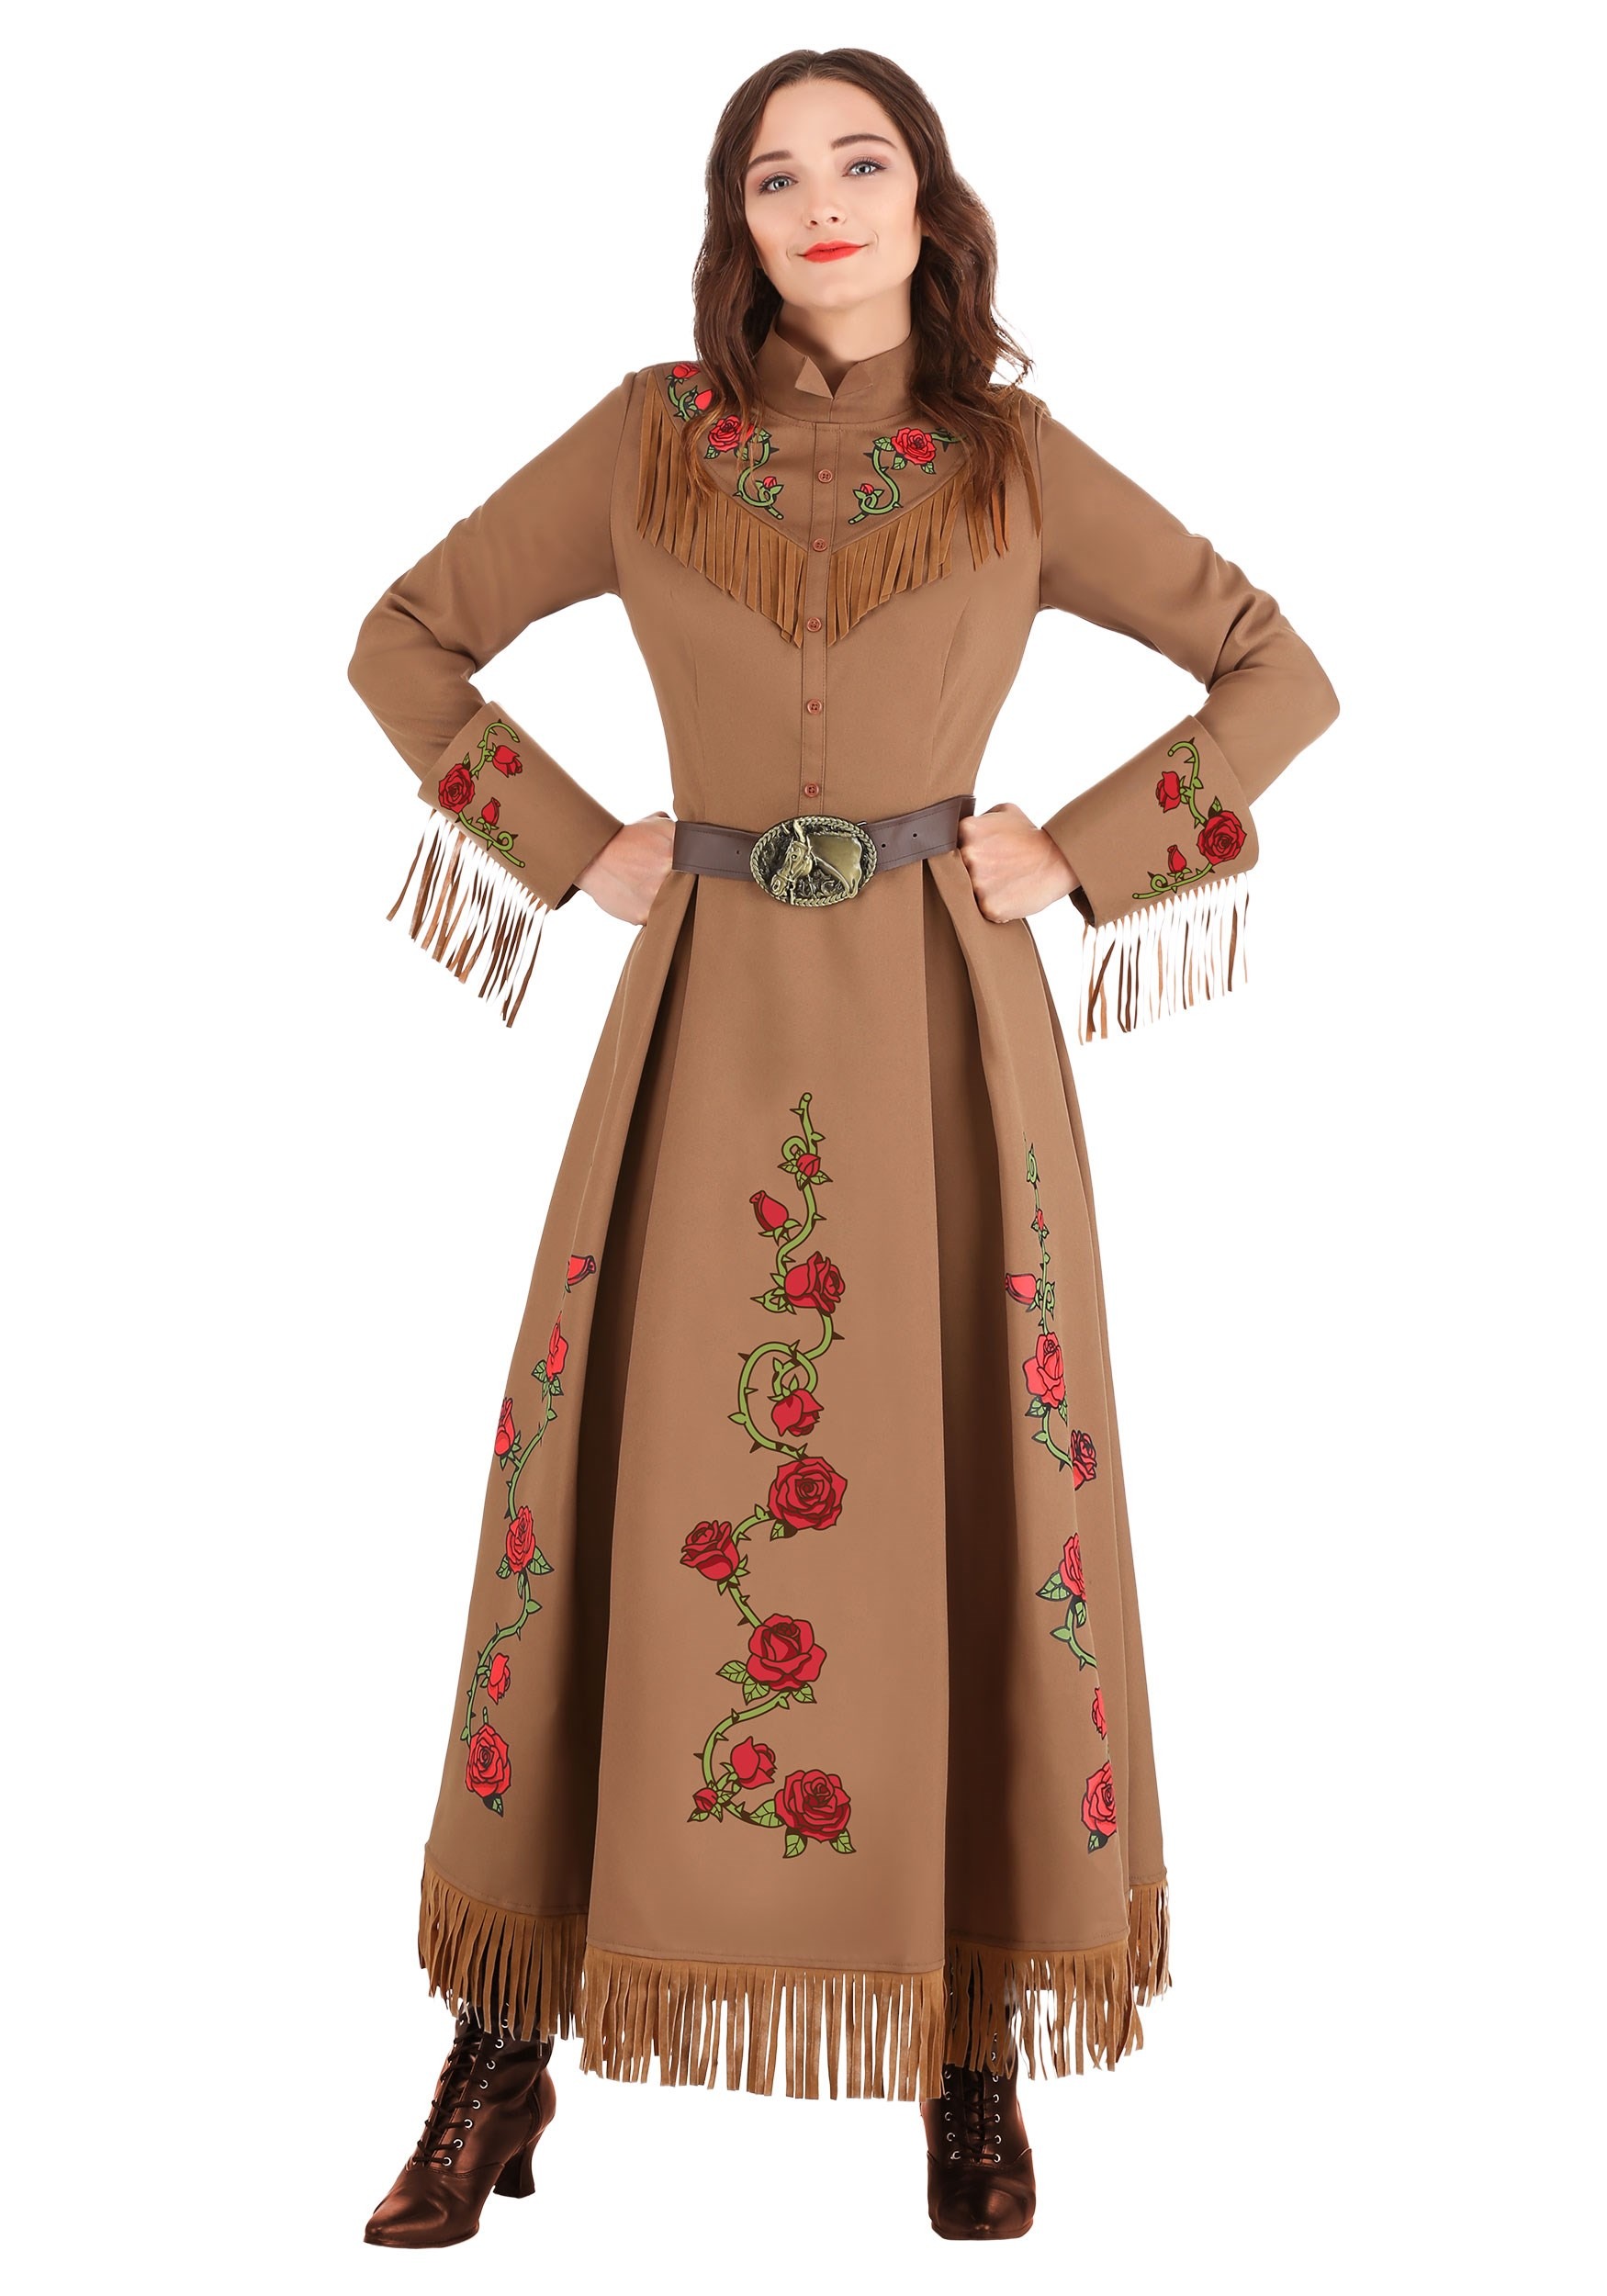 Photos - Fancy Dress Oakley FUN Costumes Annie  Cowgirl Women's Costume | Cowgirl Costumes Beige 